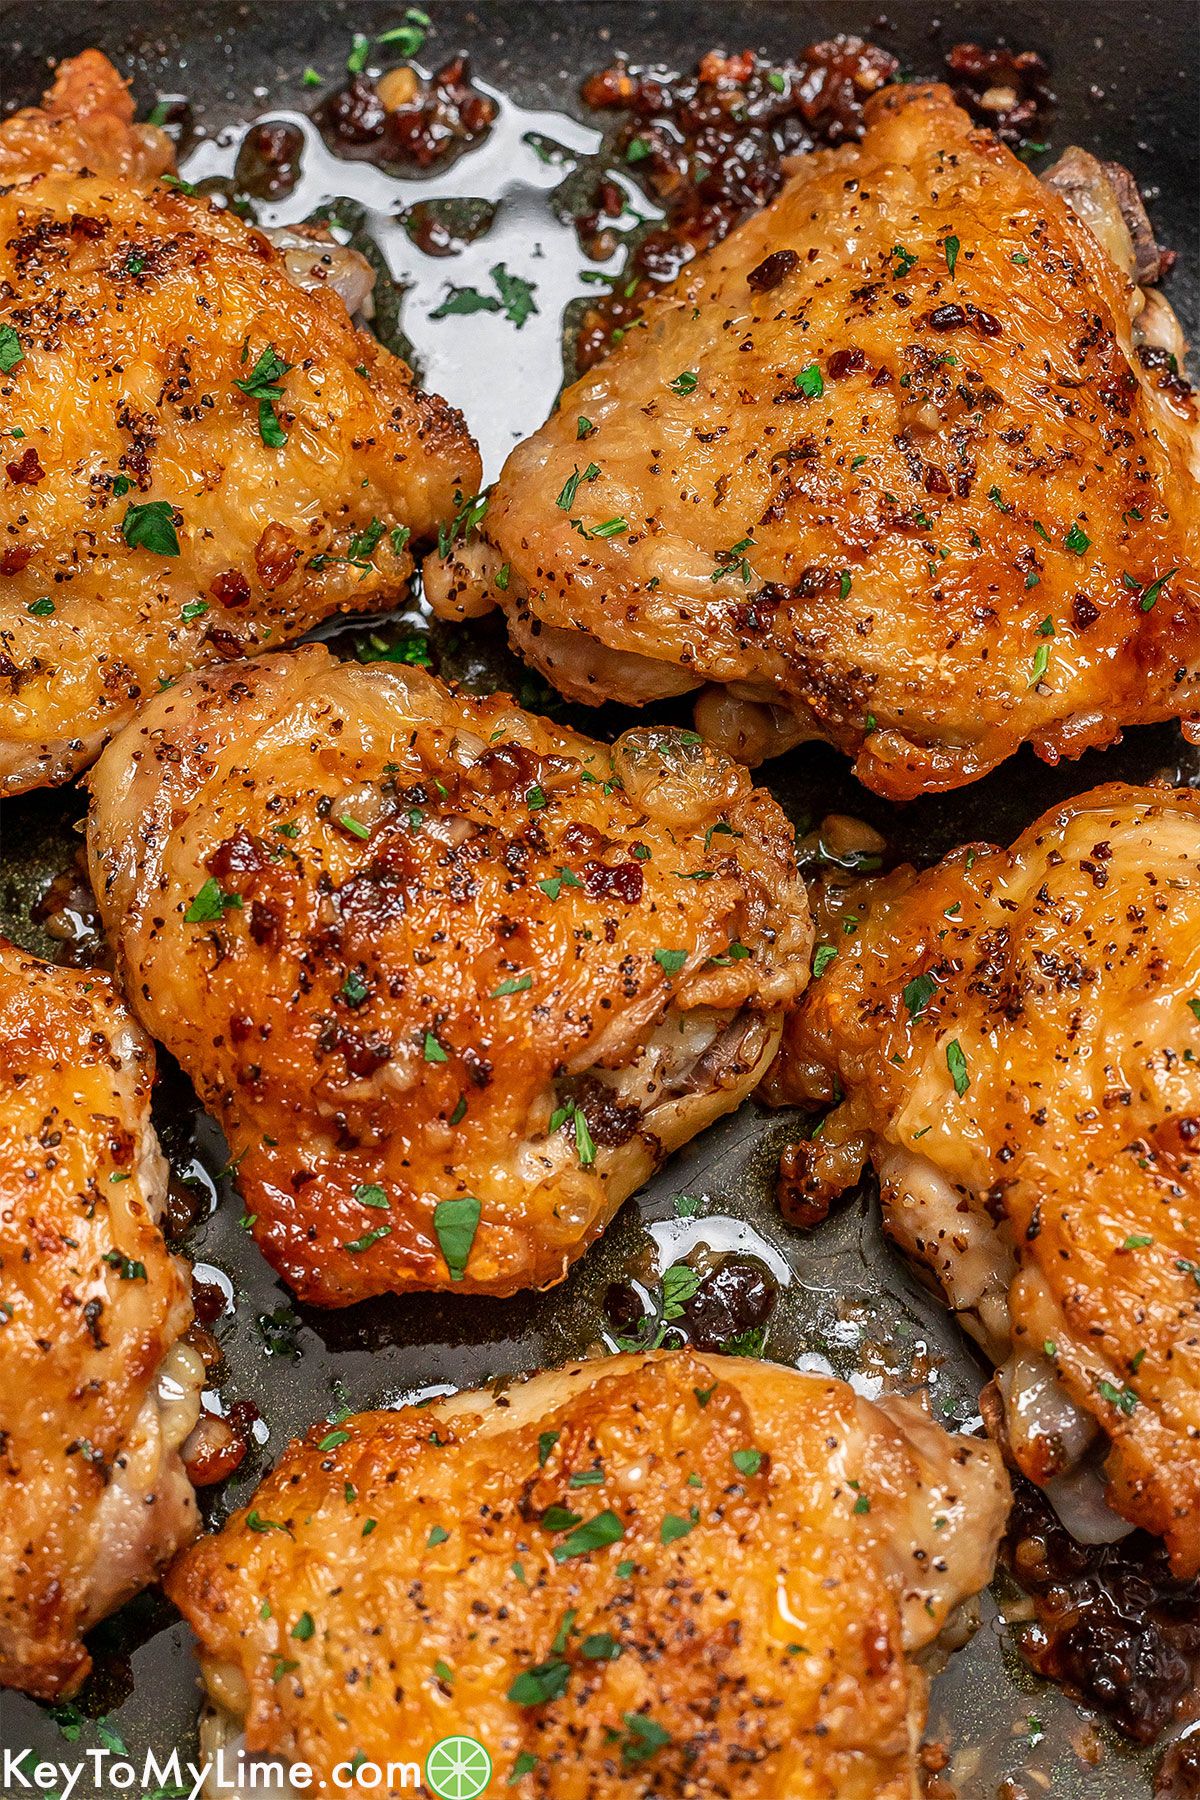 A zoomed in image showing the texture of the crispy skin on the cooked chicken thighs.